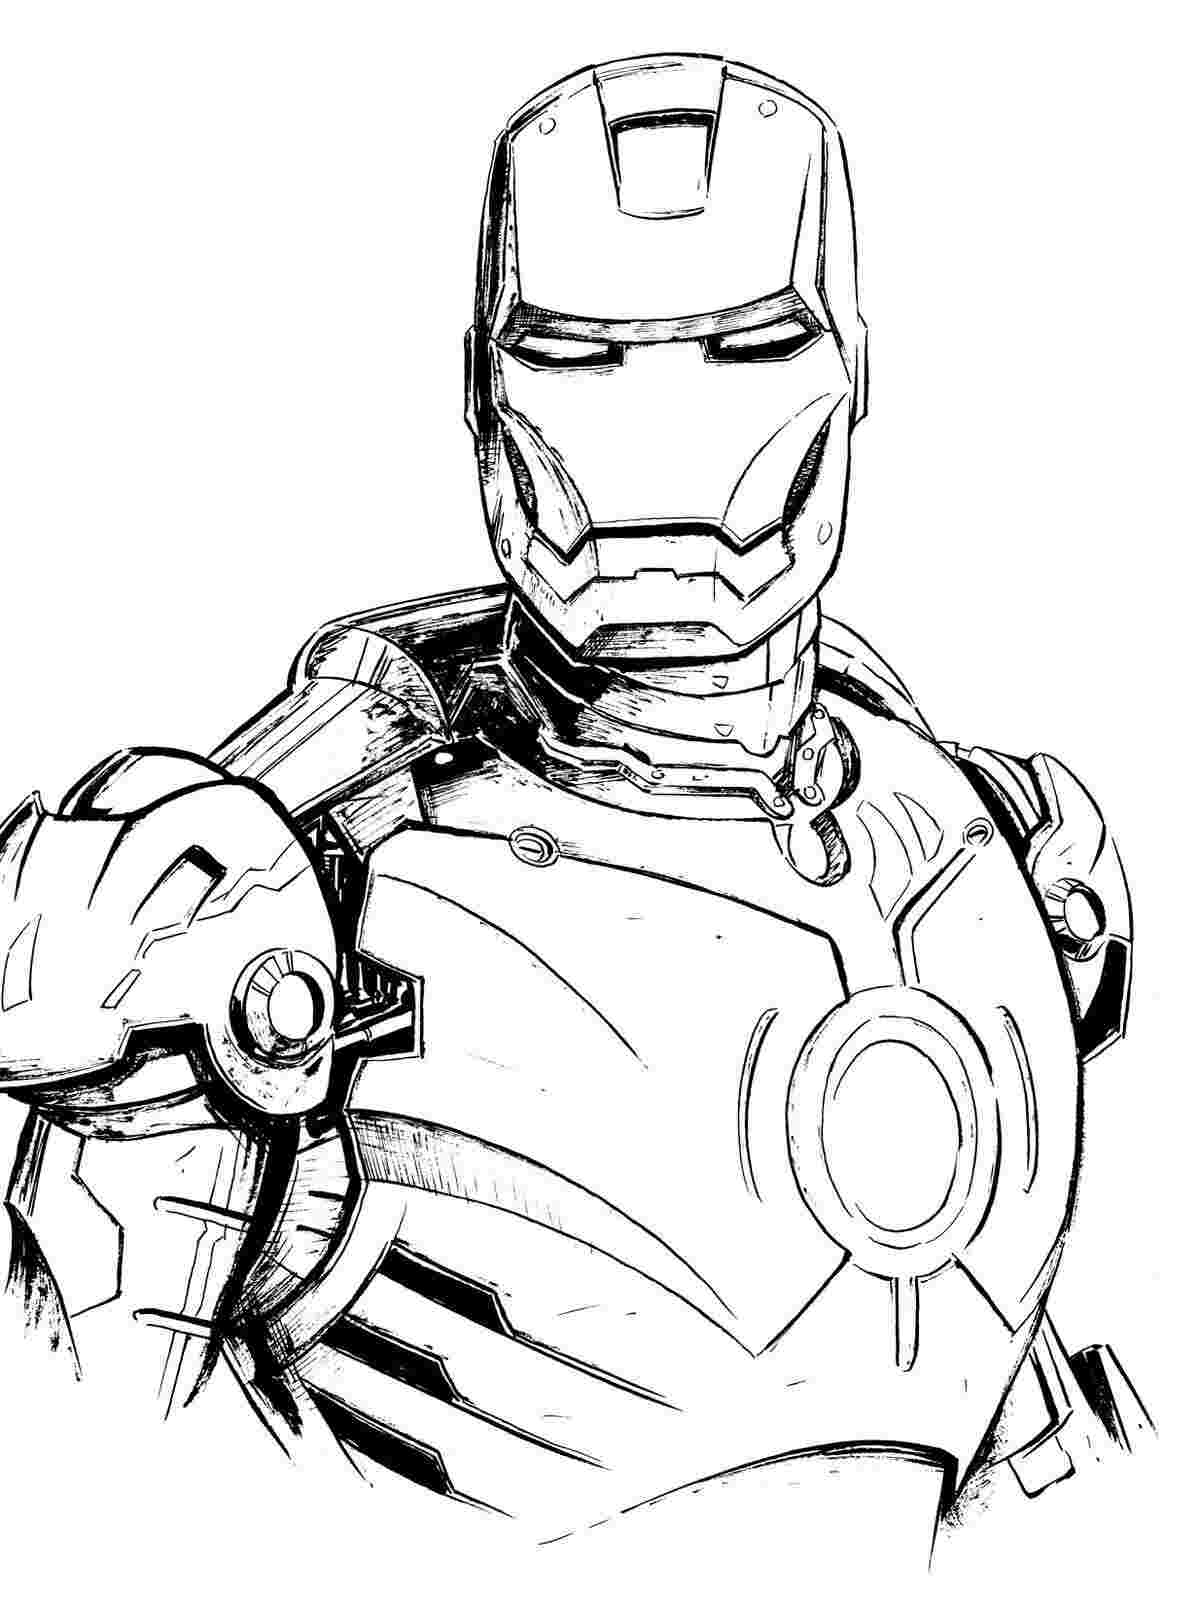 Horrible Iron man armor has a powerful circle on its chest Coloring Page